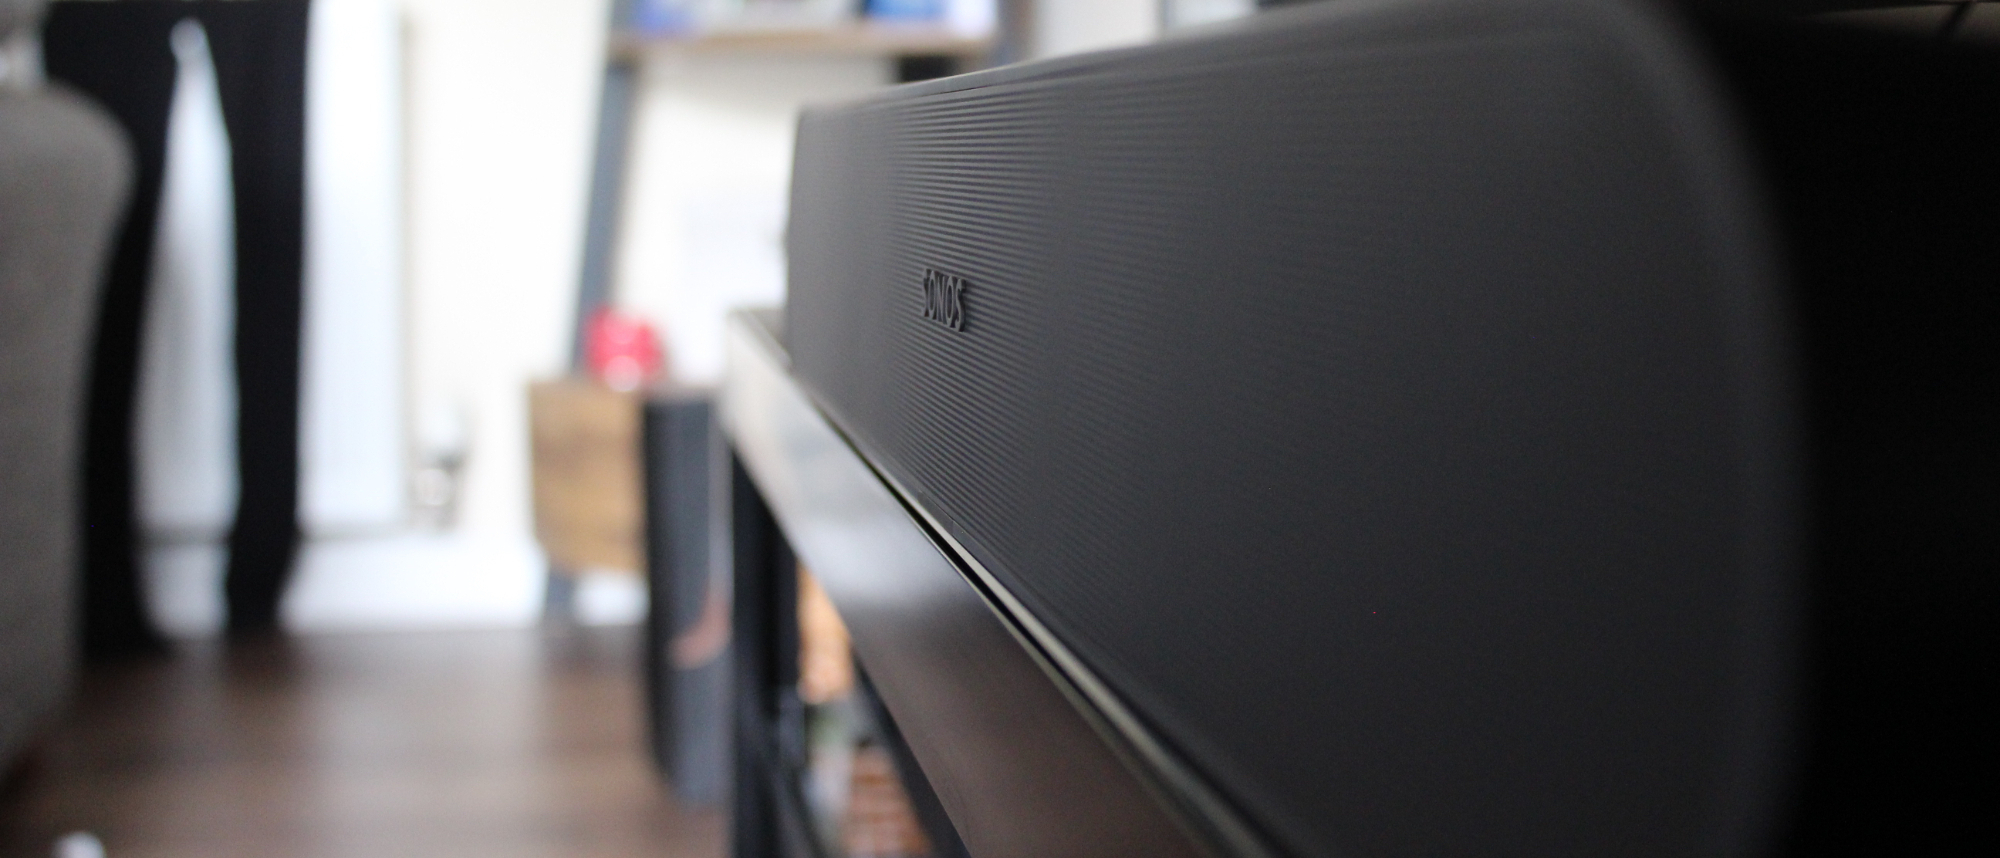 Sonos Ray soundbar review: A speaker down its ports | iMore